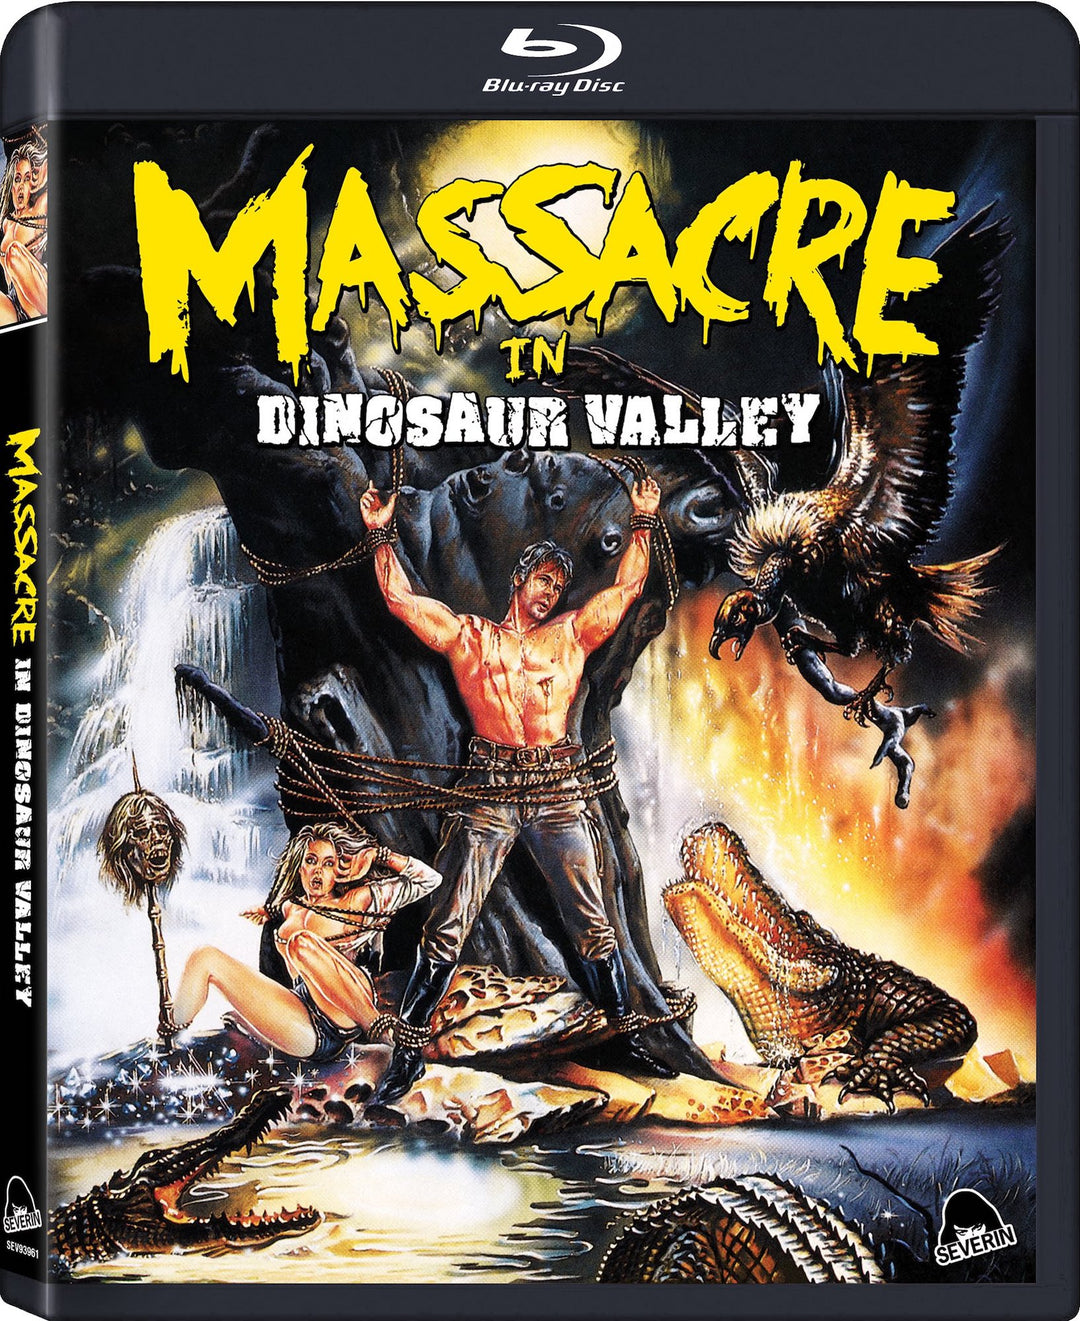 Massacre in Dinosaur Valley [Blu-ray w/Exclusive Slipcover]